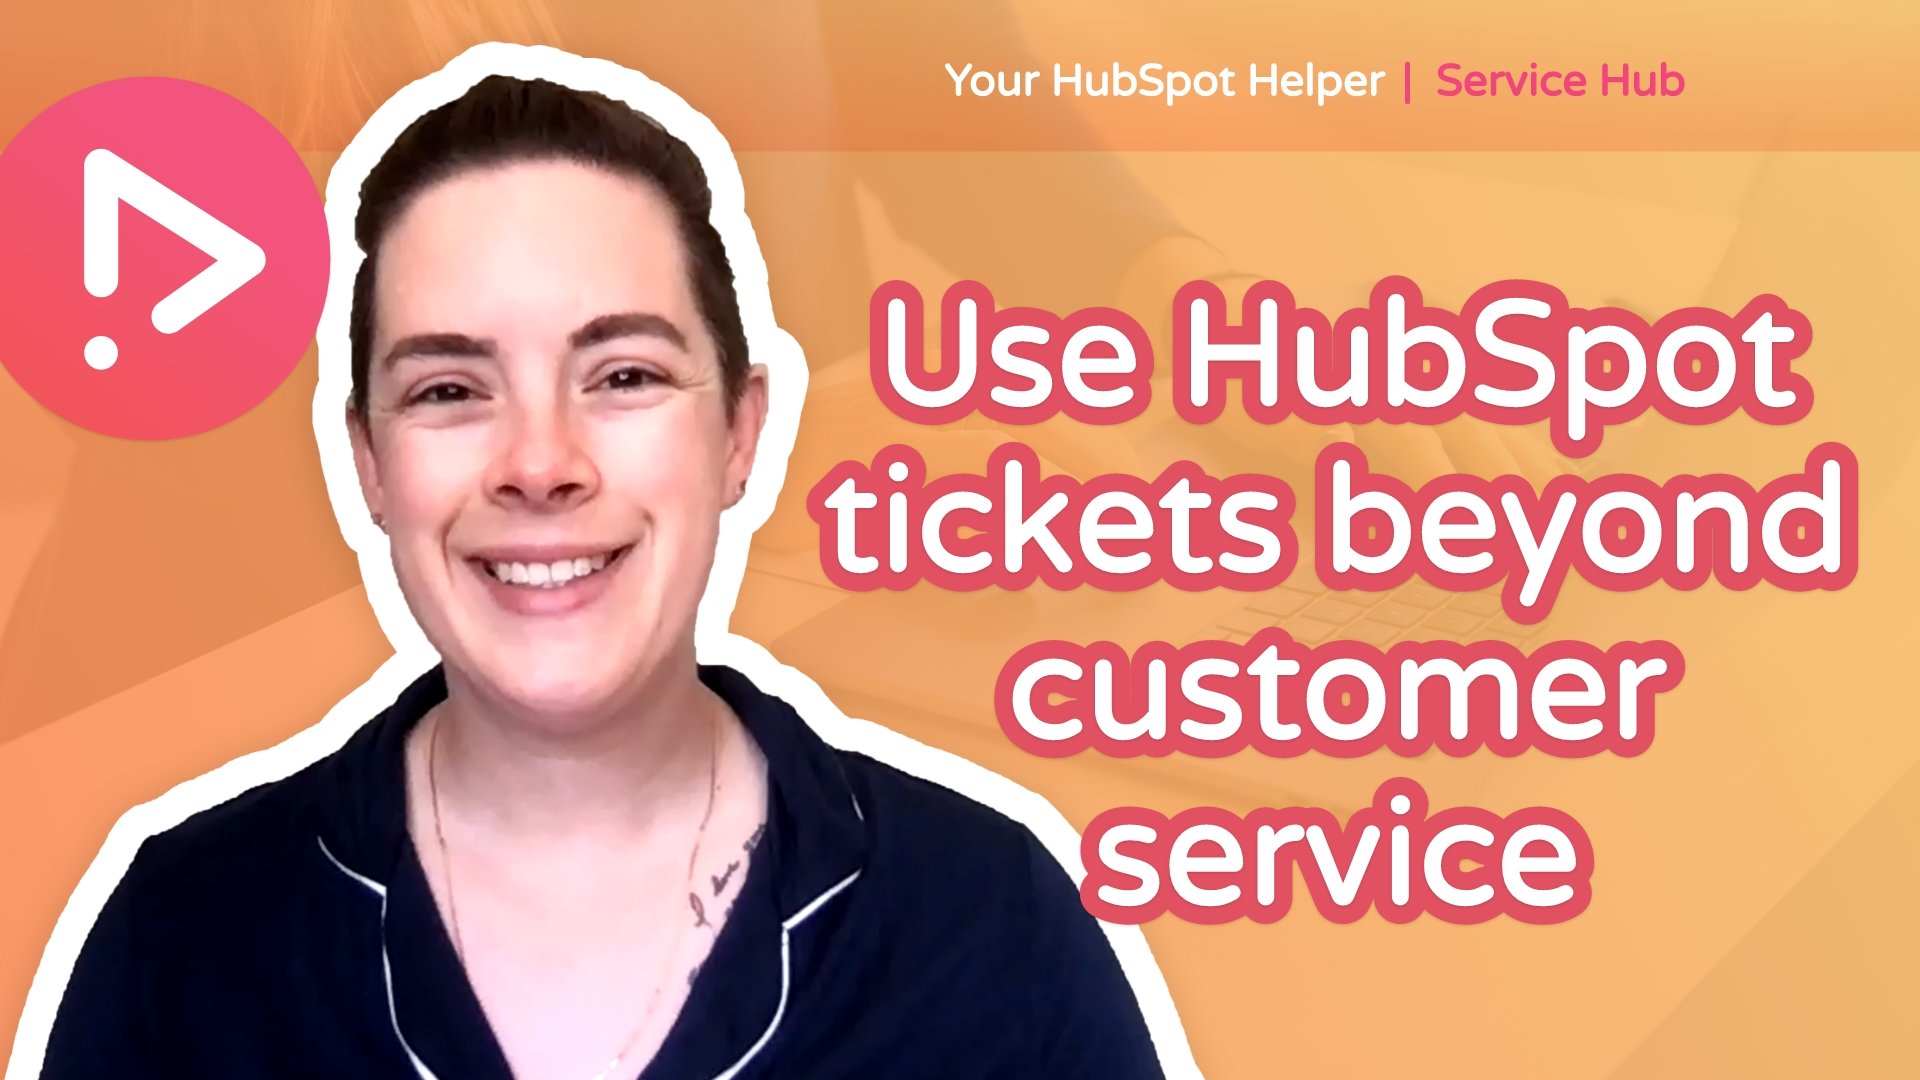 Creative Uses for Tickets in HubSpot Service Hub